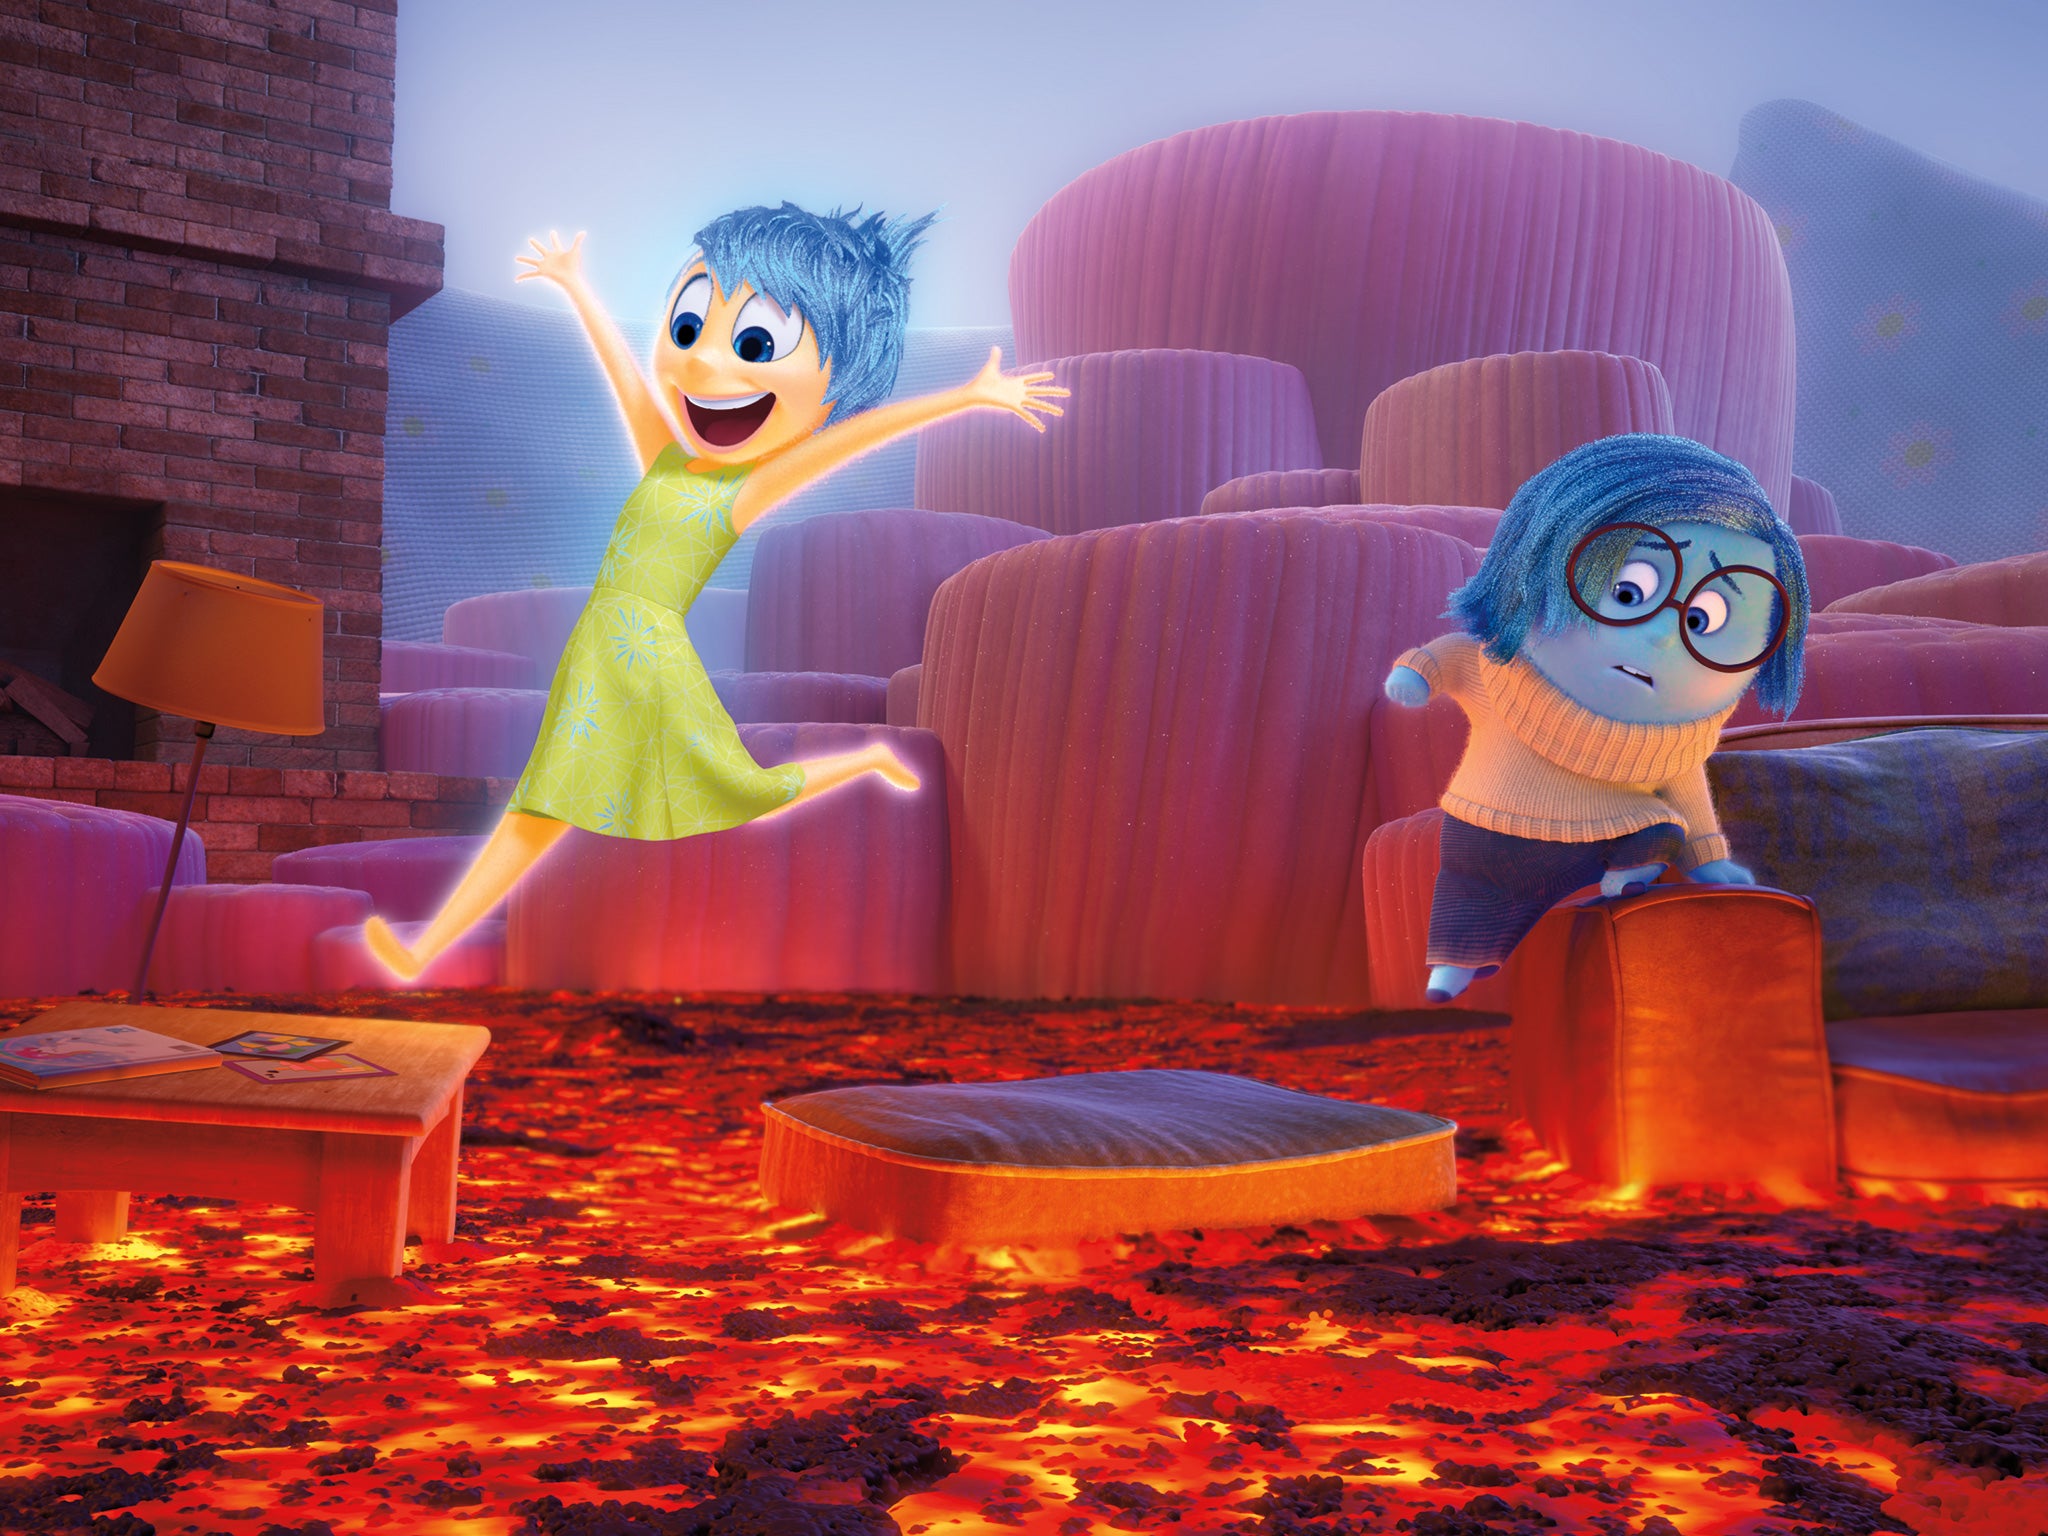 ‘Inside Out’ is one of many Pixar films to be lauded for their raw emotional power